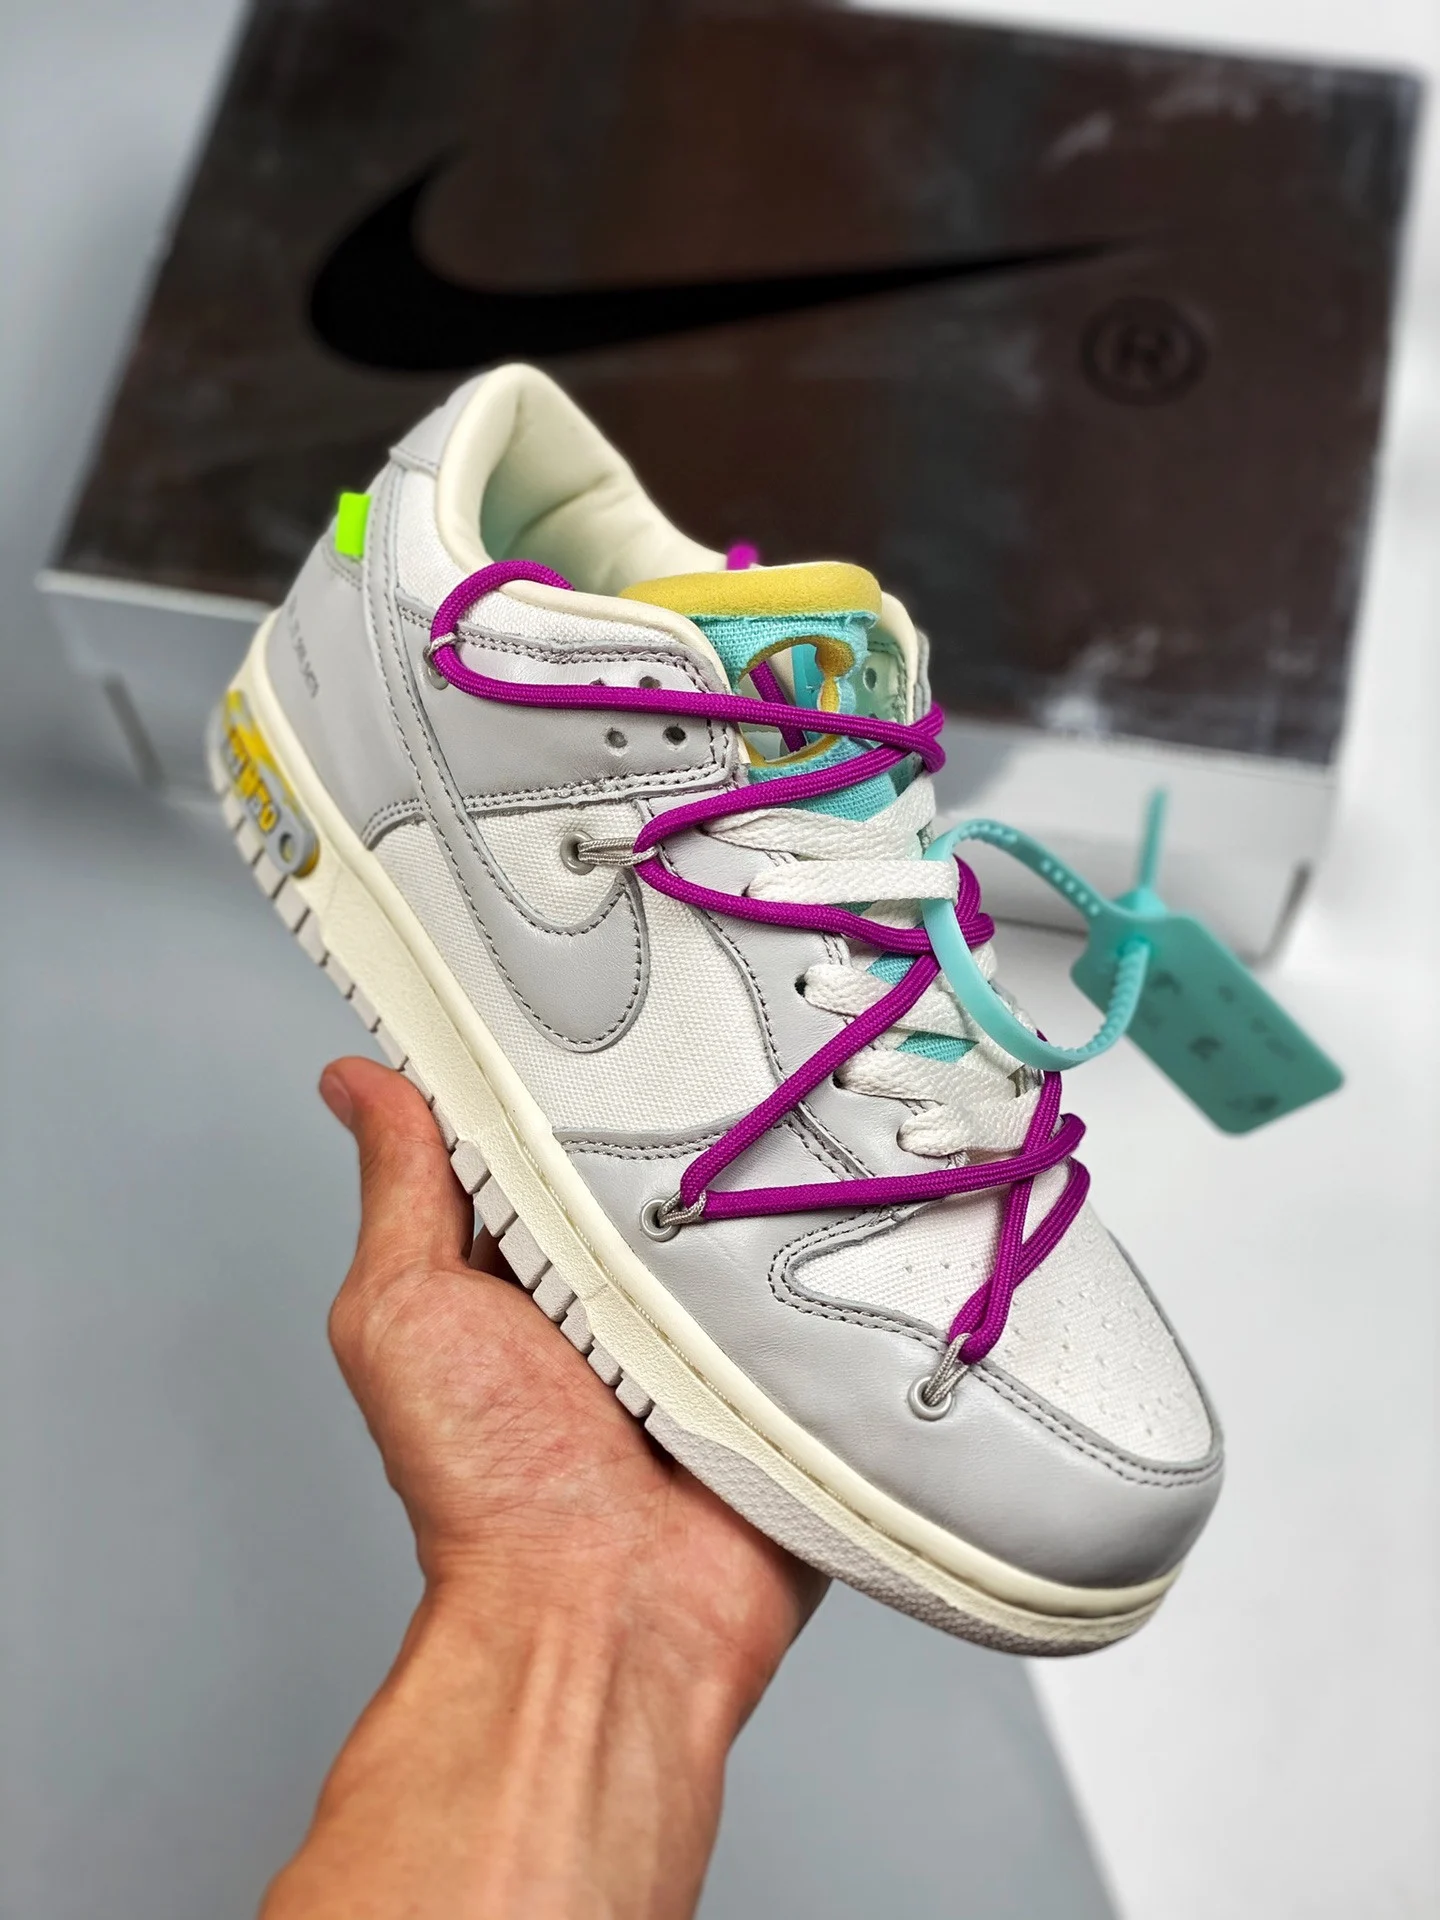 Off-White x Nike Dunk Low 21 of 50 Sail Grey Green For Sale